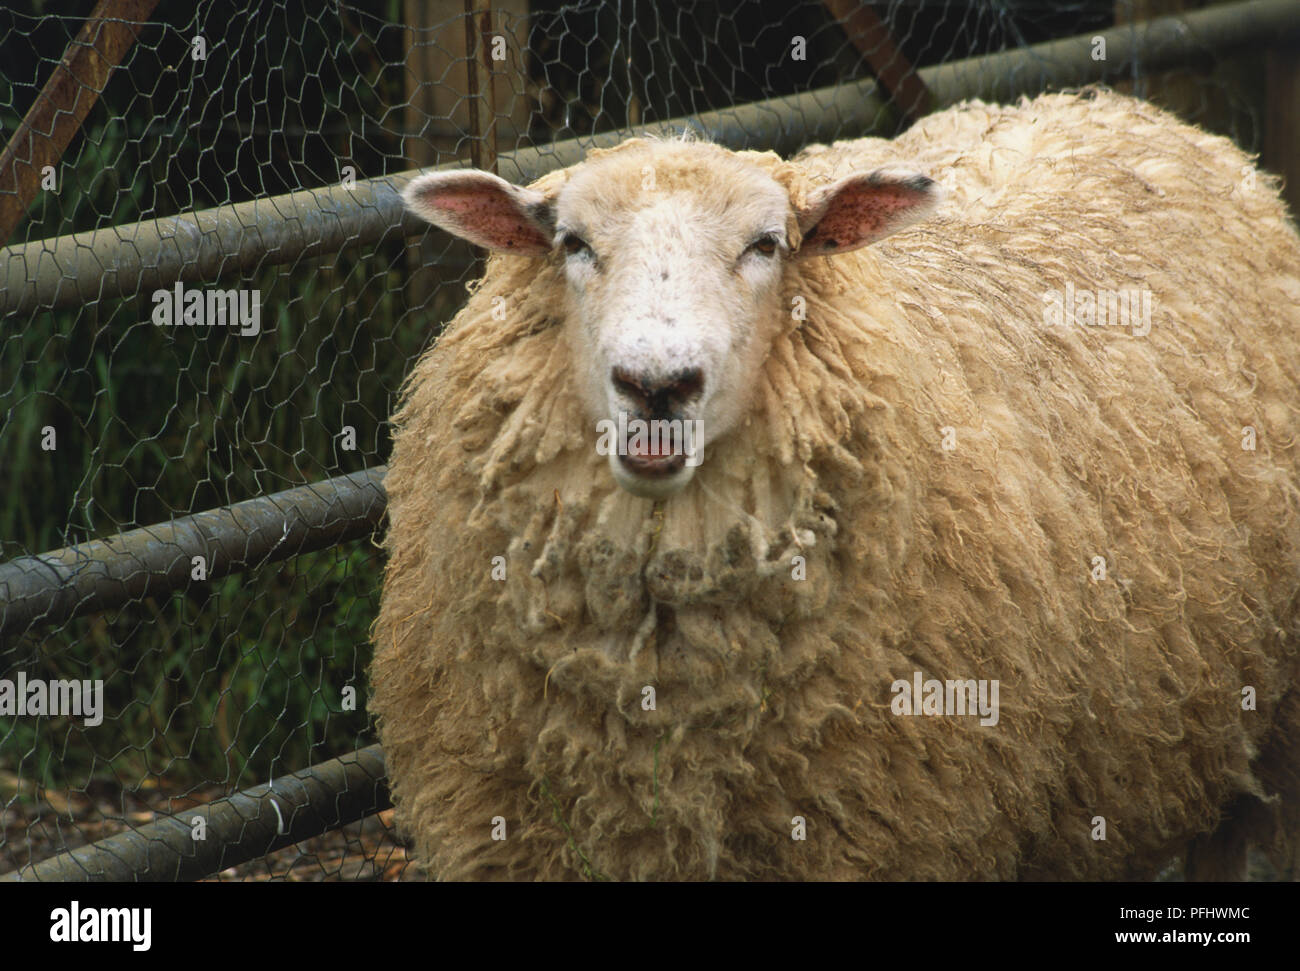 Sheep with long fleece by farm fence, front view Stock Photo